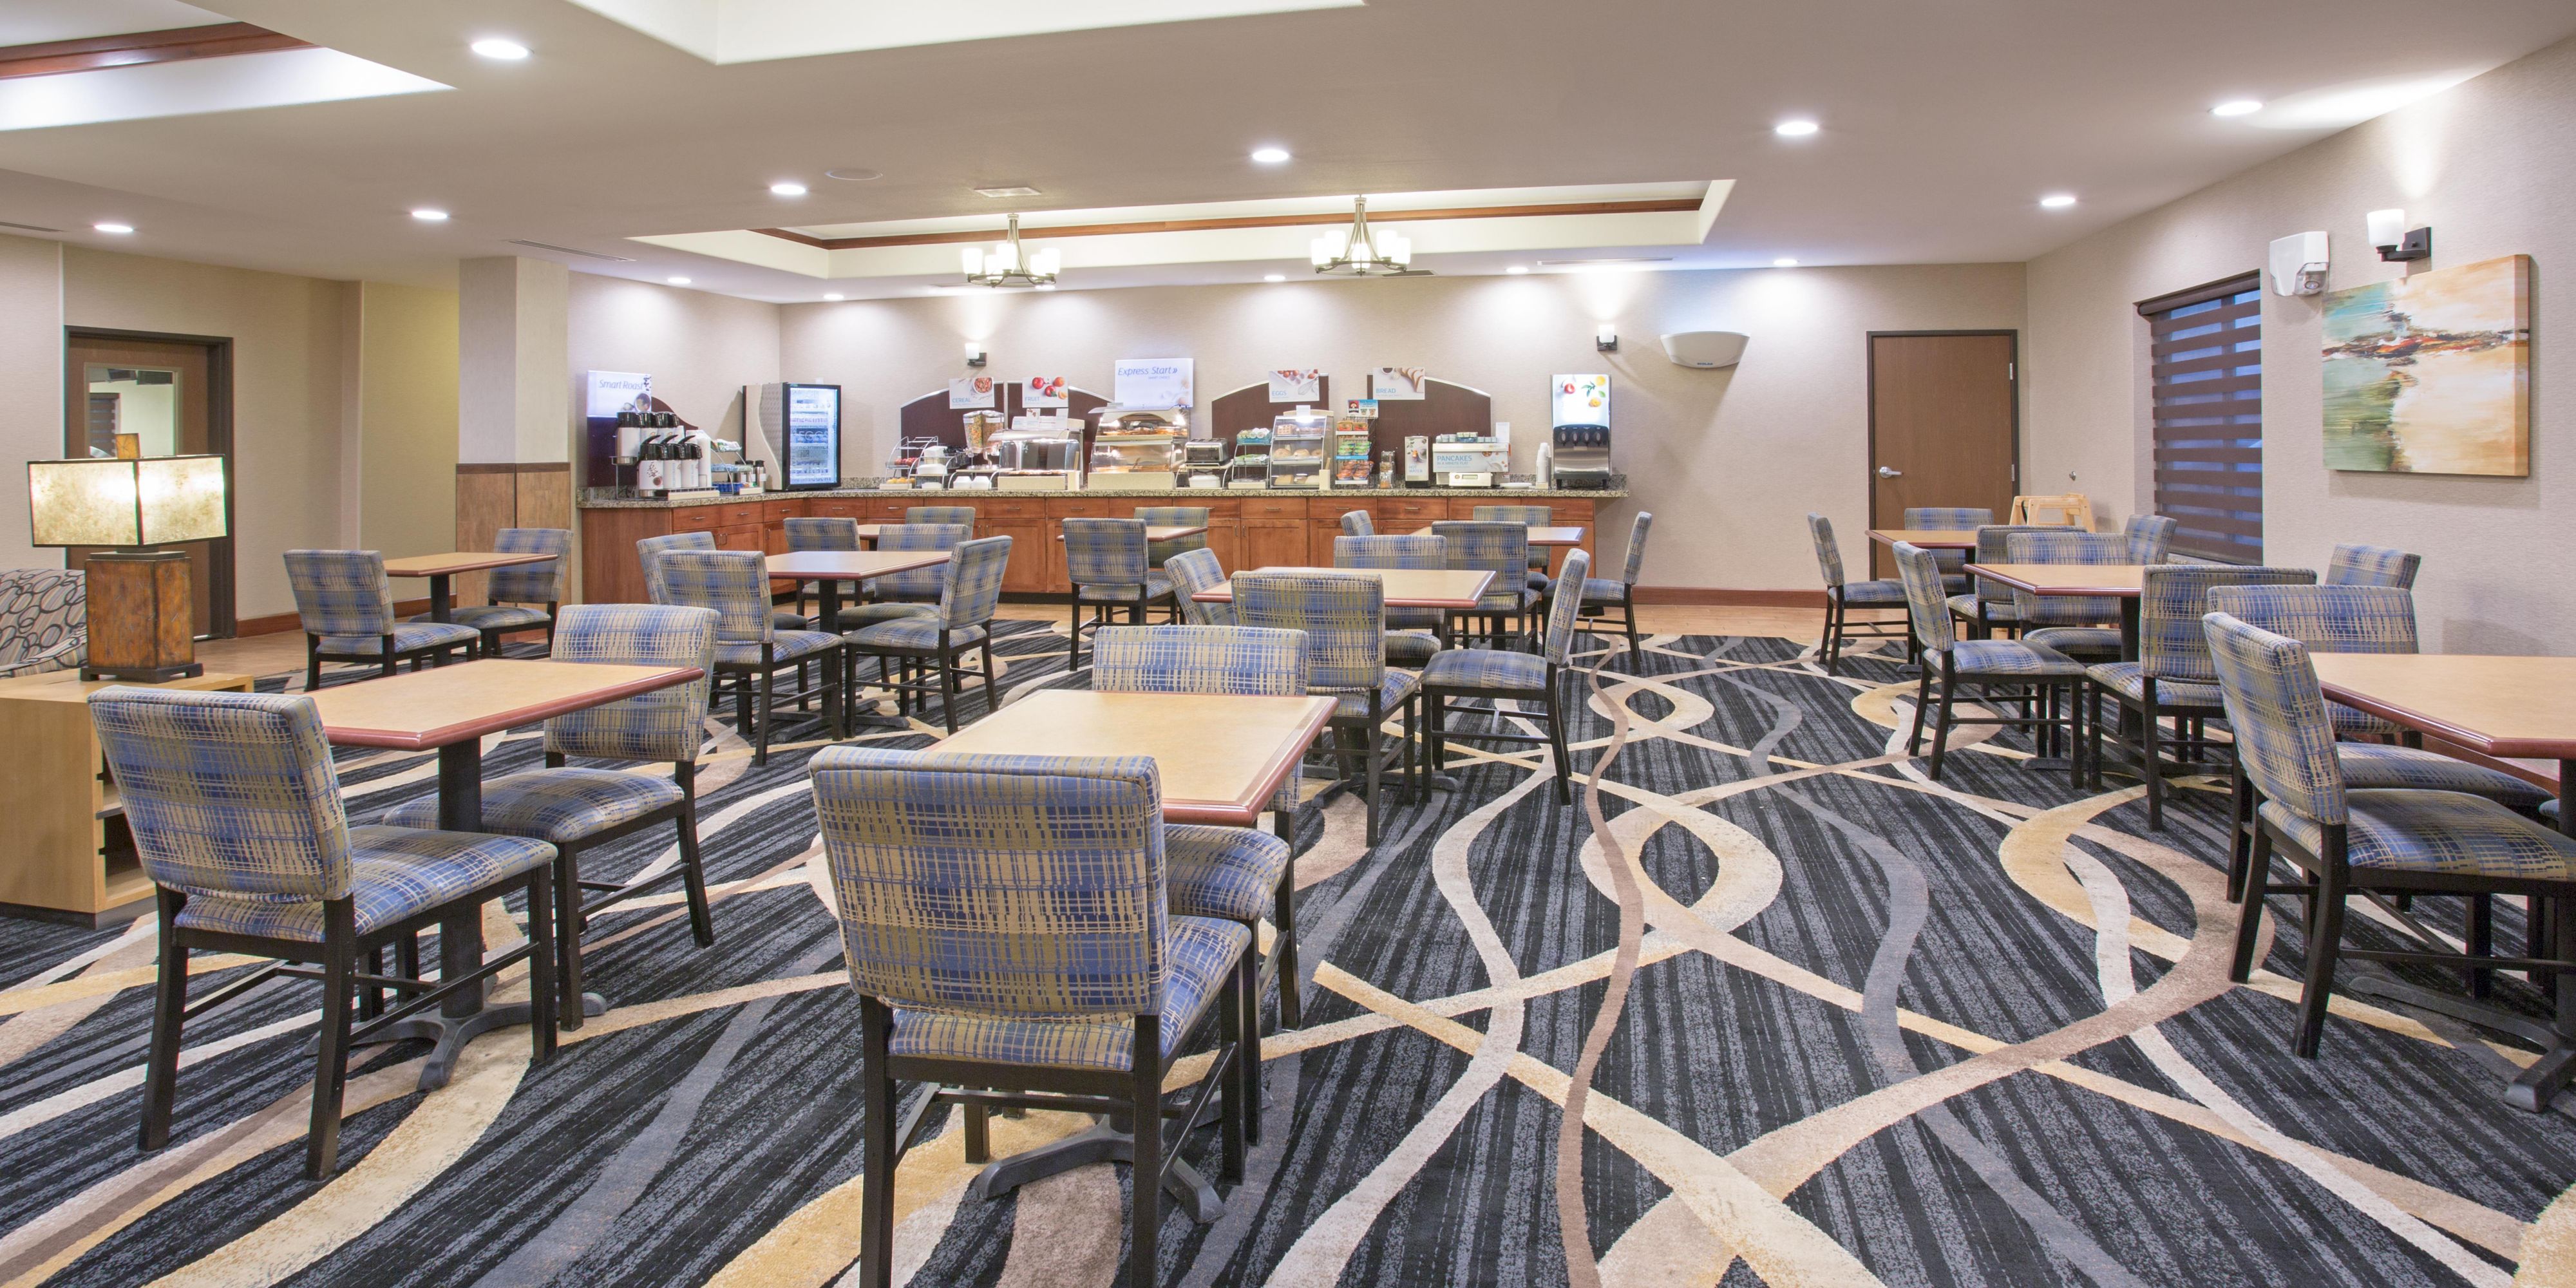 At Holiday Inn Express and Suites Glendive we have a complimentary, hot breakfast waiting for you every morning. There's a whole buffet full of offerings sure to please everyone. Our Express Start Breakfast is the perfect way to begin your day.